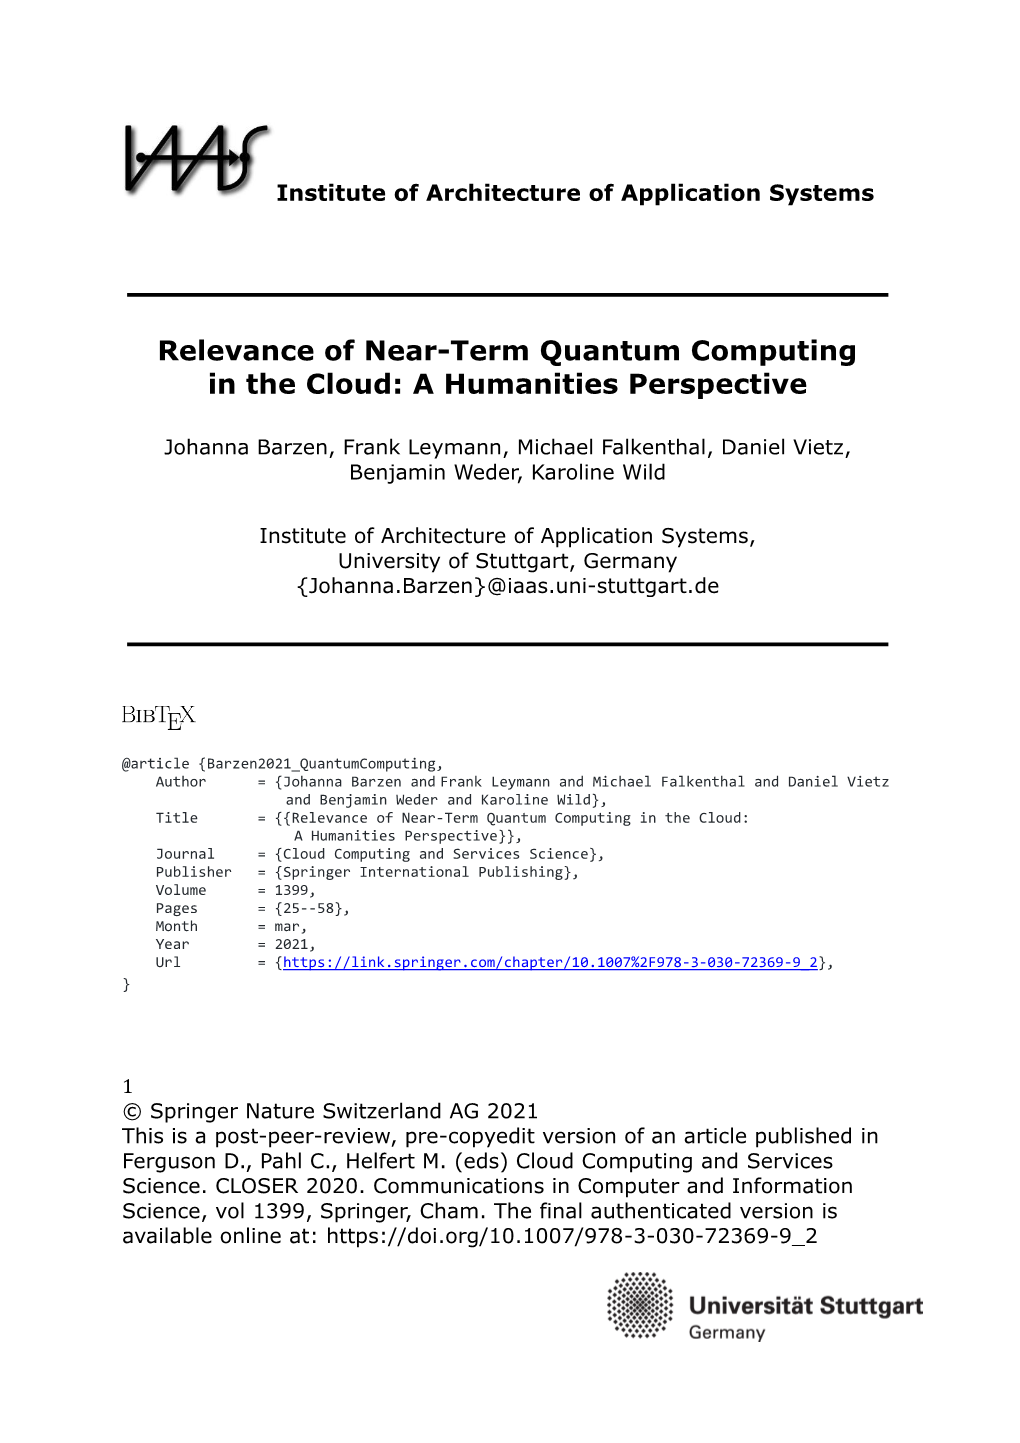 Relevance of Near-Term Quantum Computing in the Cloud: a Humanities Perspective